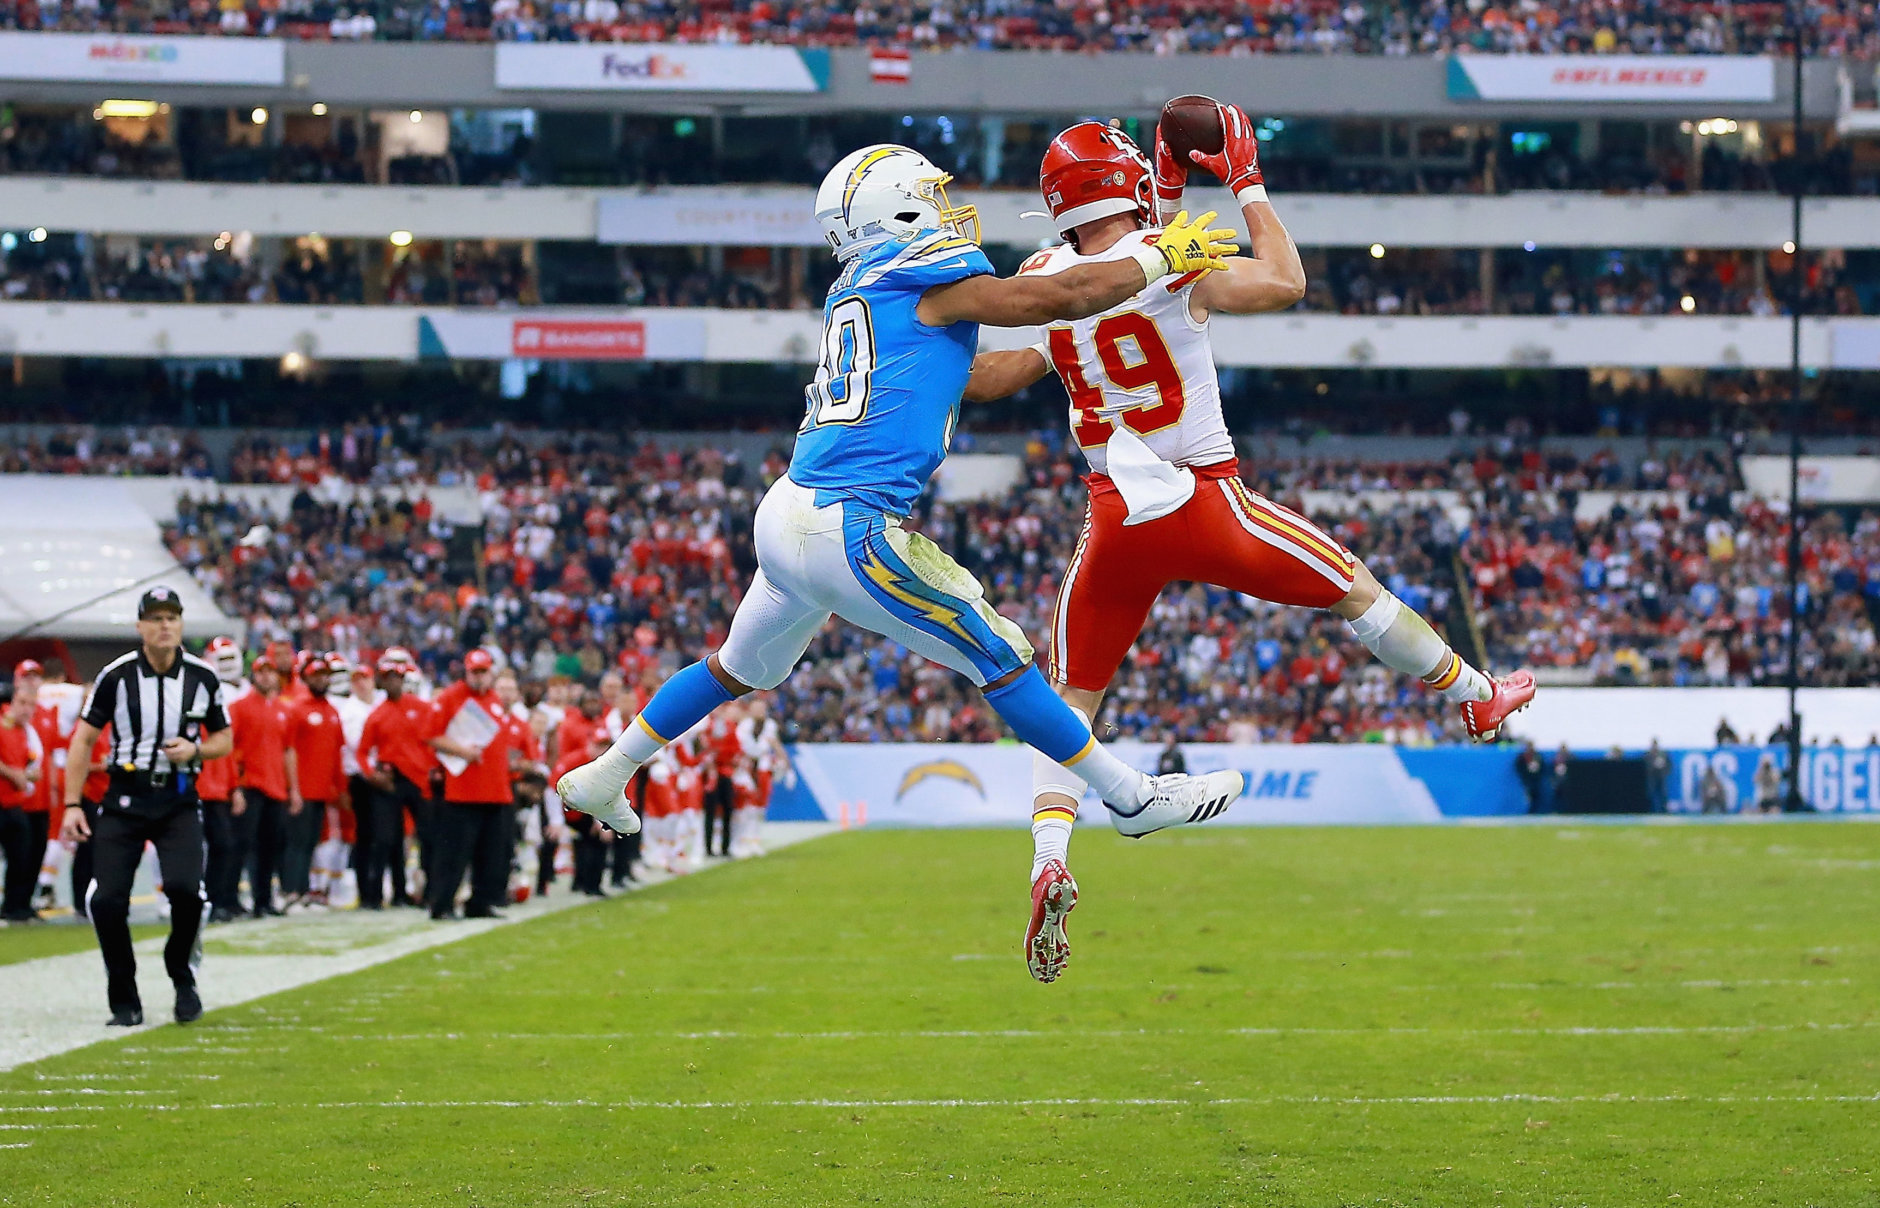 <p><em><strong>Chiefs 24</strong></em><br />
<em><strong>Chargers 17</strong></em></p>
<p>L.A. and Philip Rivers can&#8217;t blame this one on the crappy turf or the Mexican altitude. Rivers is in the midst of his worst two-game stretch of his 16-year career and his <a href="https://twitter.com/ESPNStatsInfo/status/1196650943514697728?s=20" target="_blank" rel="noopener">record of futility in close games</a> is the stuff of legend. Now that the Chargers&#8217; postseason hopes are little more than a pipe dream, it&#8217;s time to start considering a hard reset &#8212; if not a full-on rebuild.</p>
